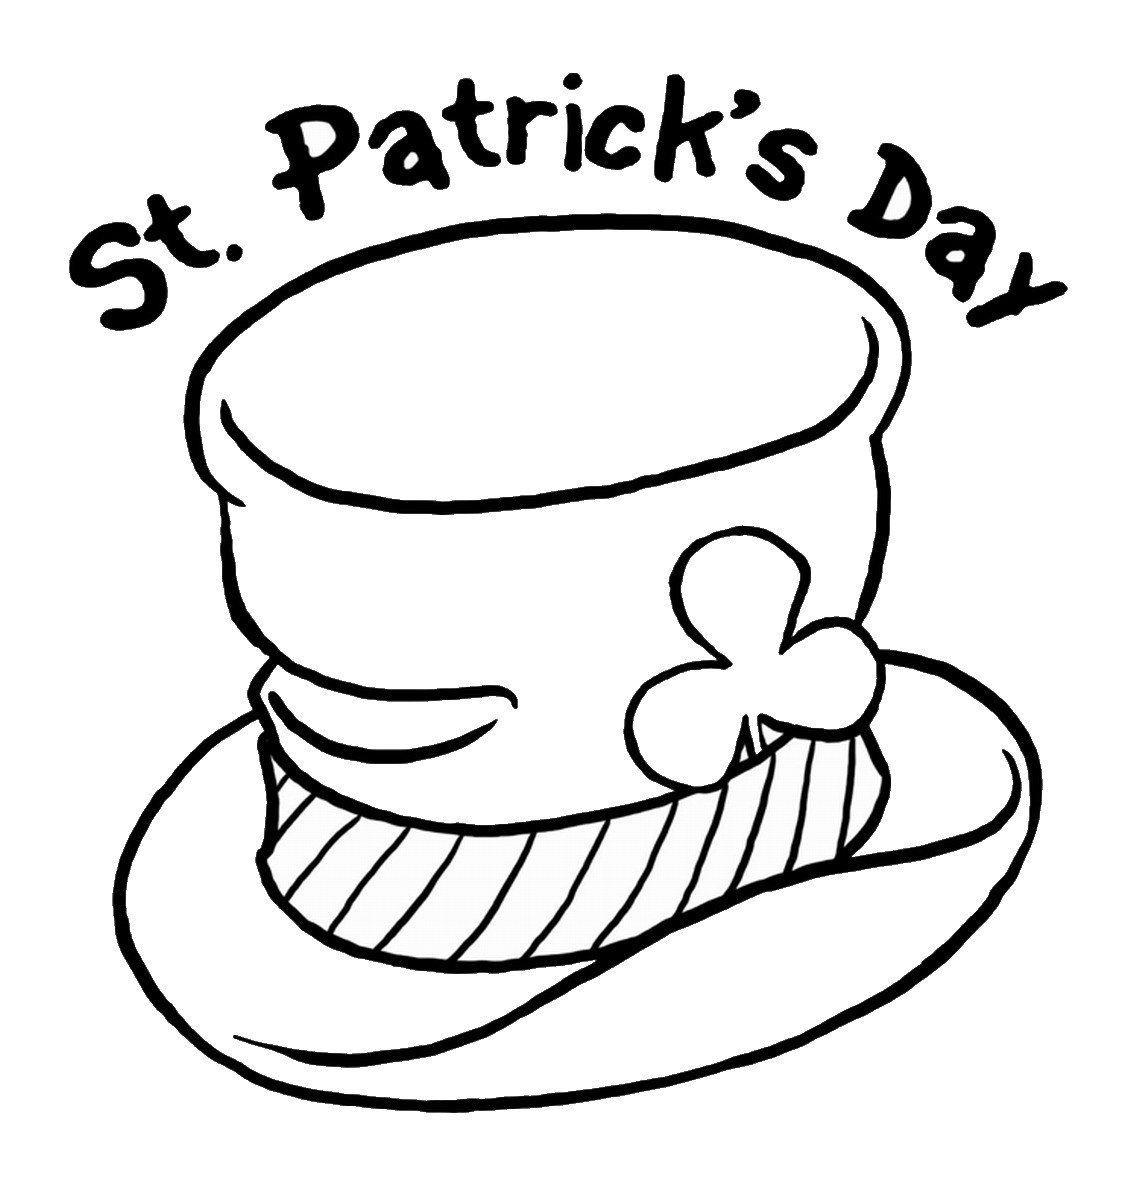 St. Patrick'S Day Coloring Sheets For Kids
 St Patrick s Day Coloring Pages for childrens printable